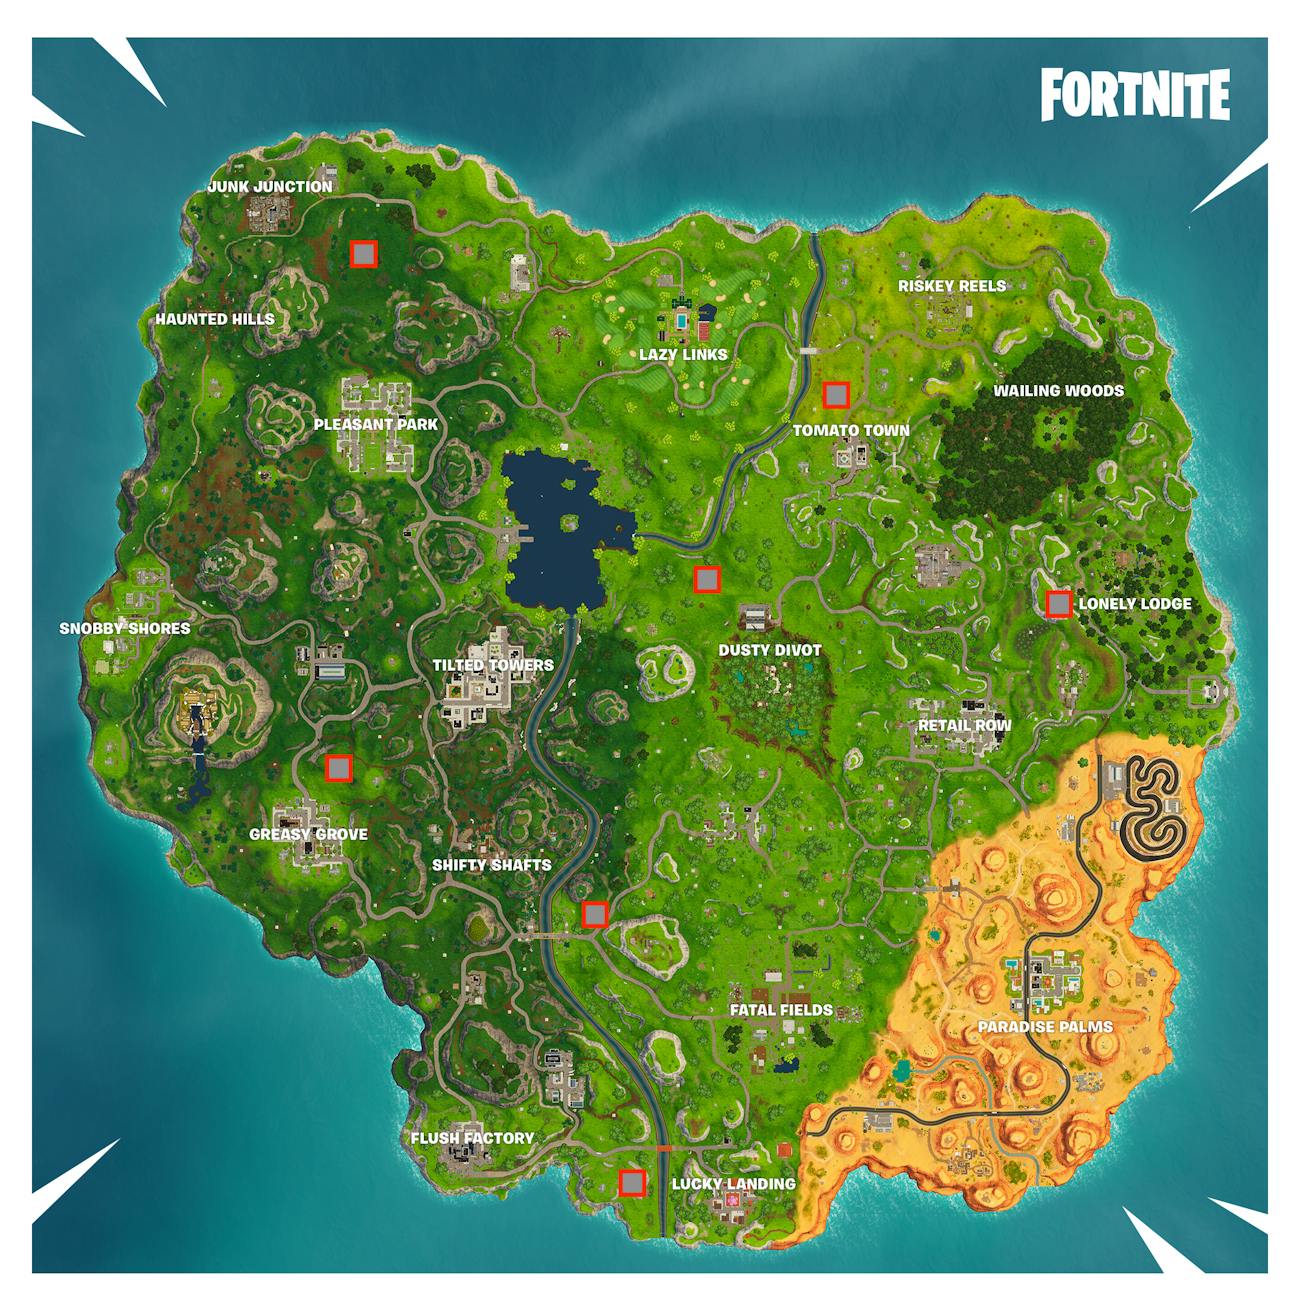 Fortnite Stone Heads Locations Map Best Strategy To Beat The - fortnite stone heads